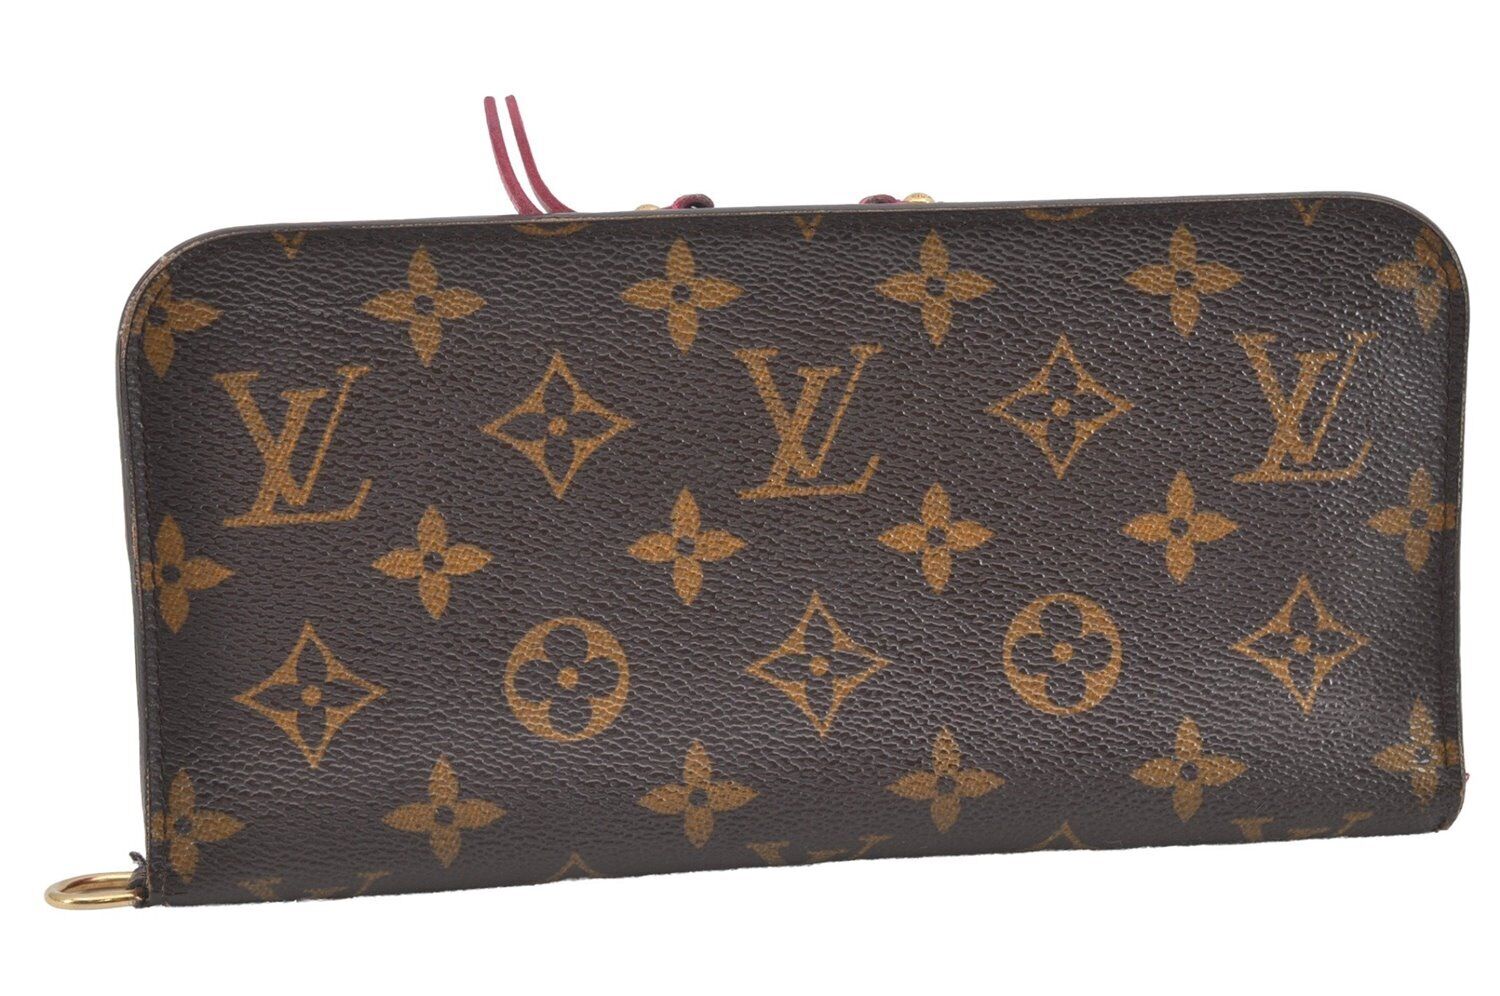 Louis Vuitton Style 🤎 Timeless. Year-round. Lasts a lifetime